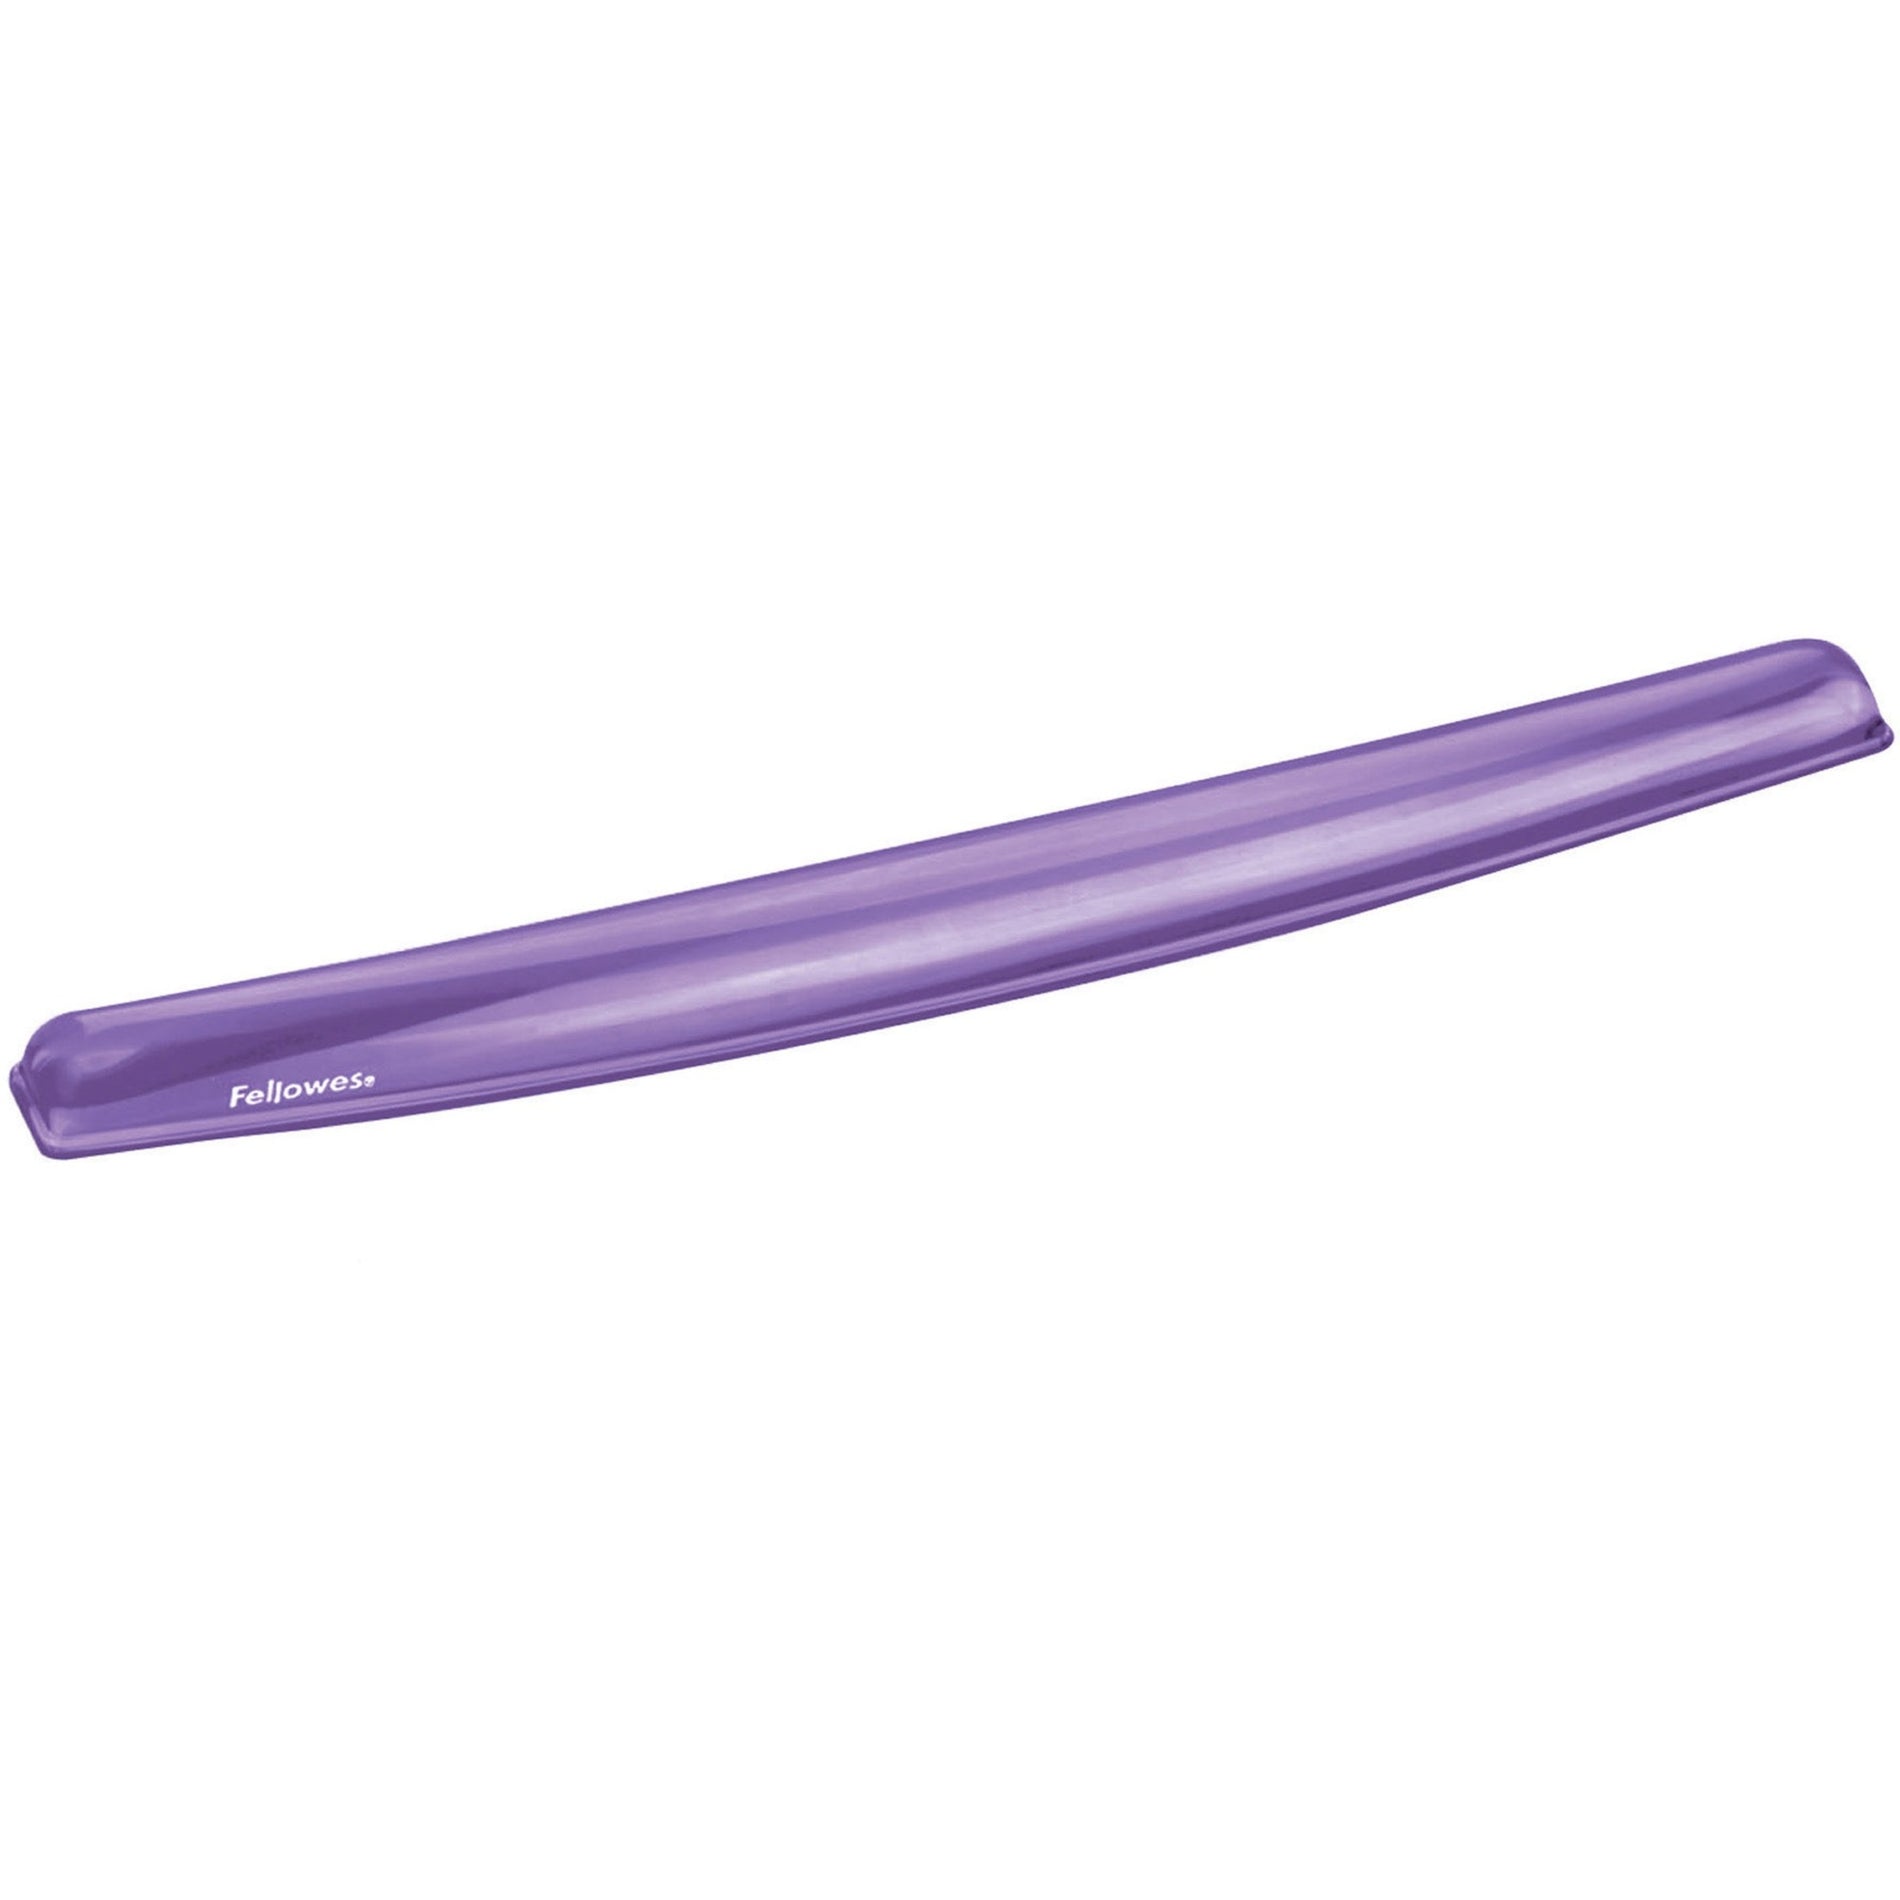 Fellowes 91437 Gel Wrist Rest Crystals, Purple - Pressure Reliever, Ergonomic, Comfortable, Easy to Clean, Non-skid Base